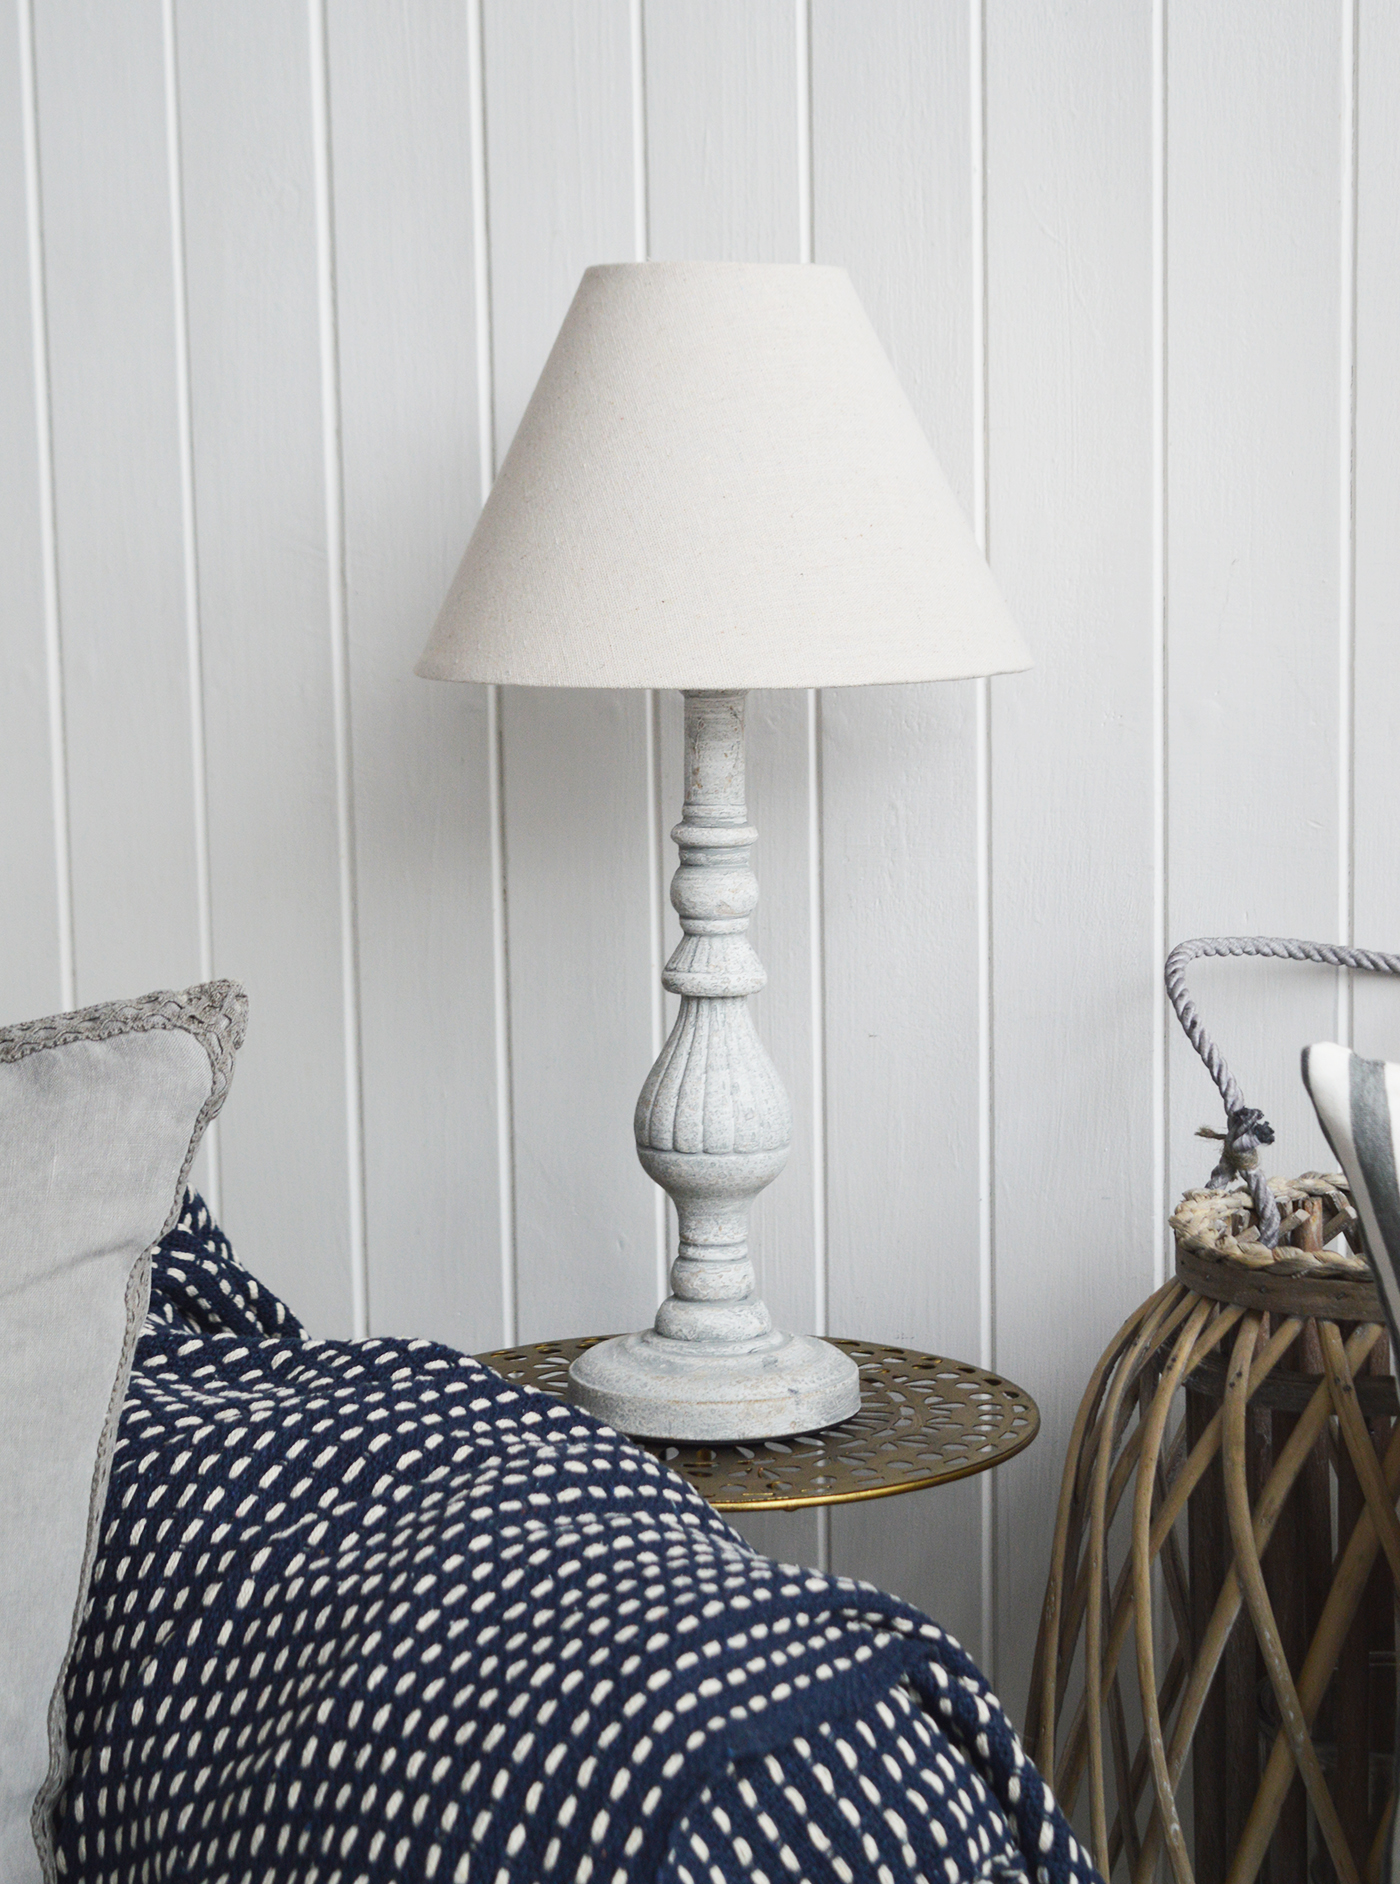 La Maison rustic grey table lamp from The White Lighthouse Furniture. A lovely table lamp for bedside table or living room. New England style lighting and lamps